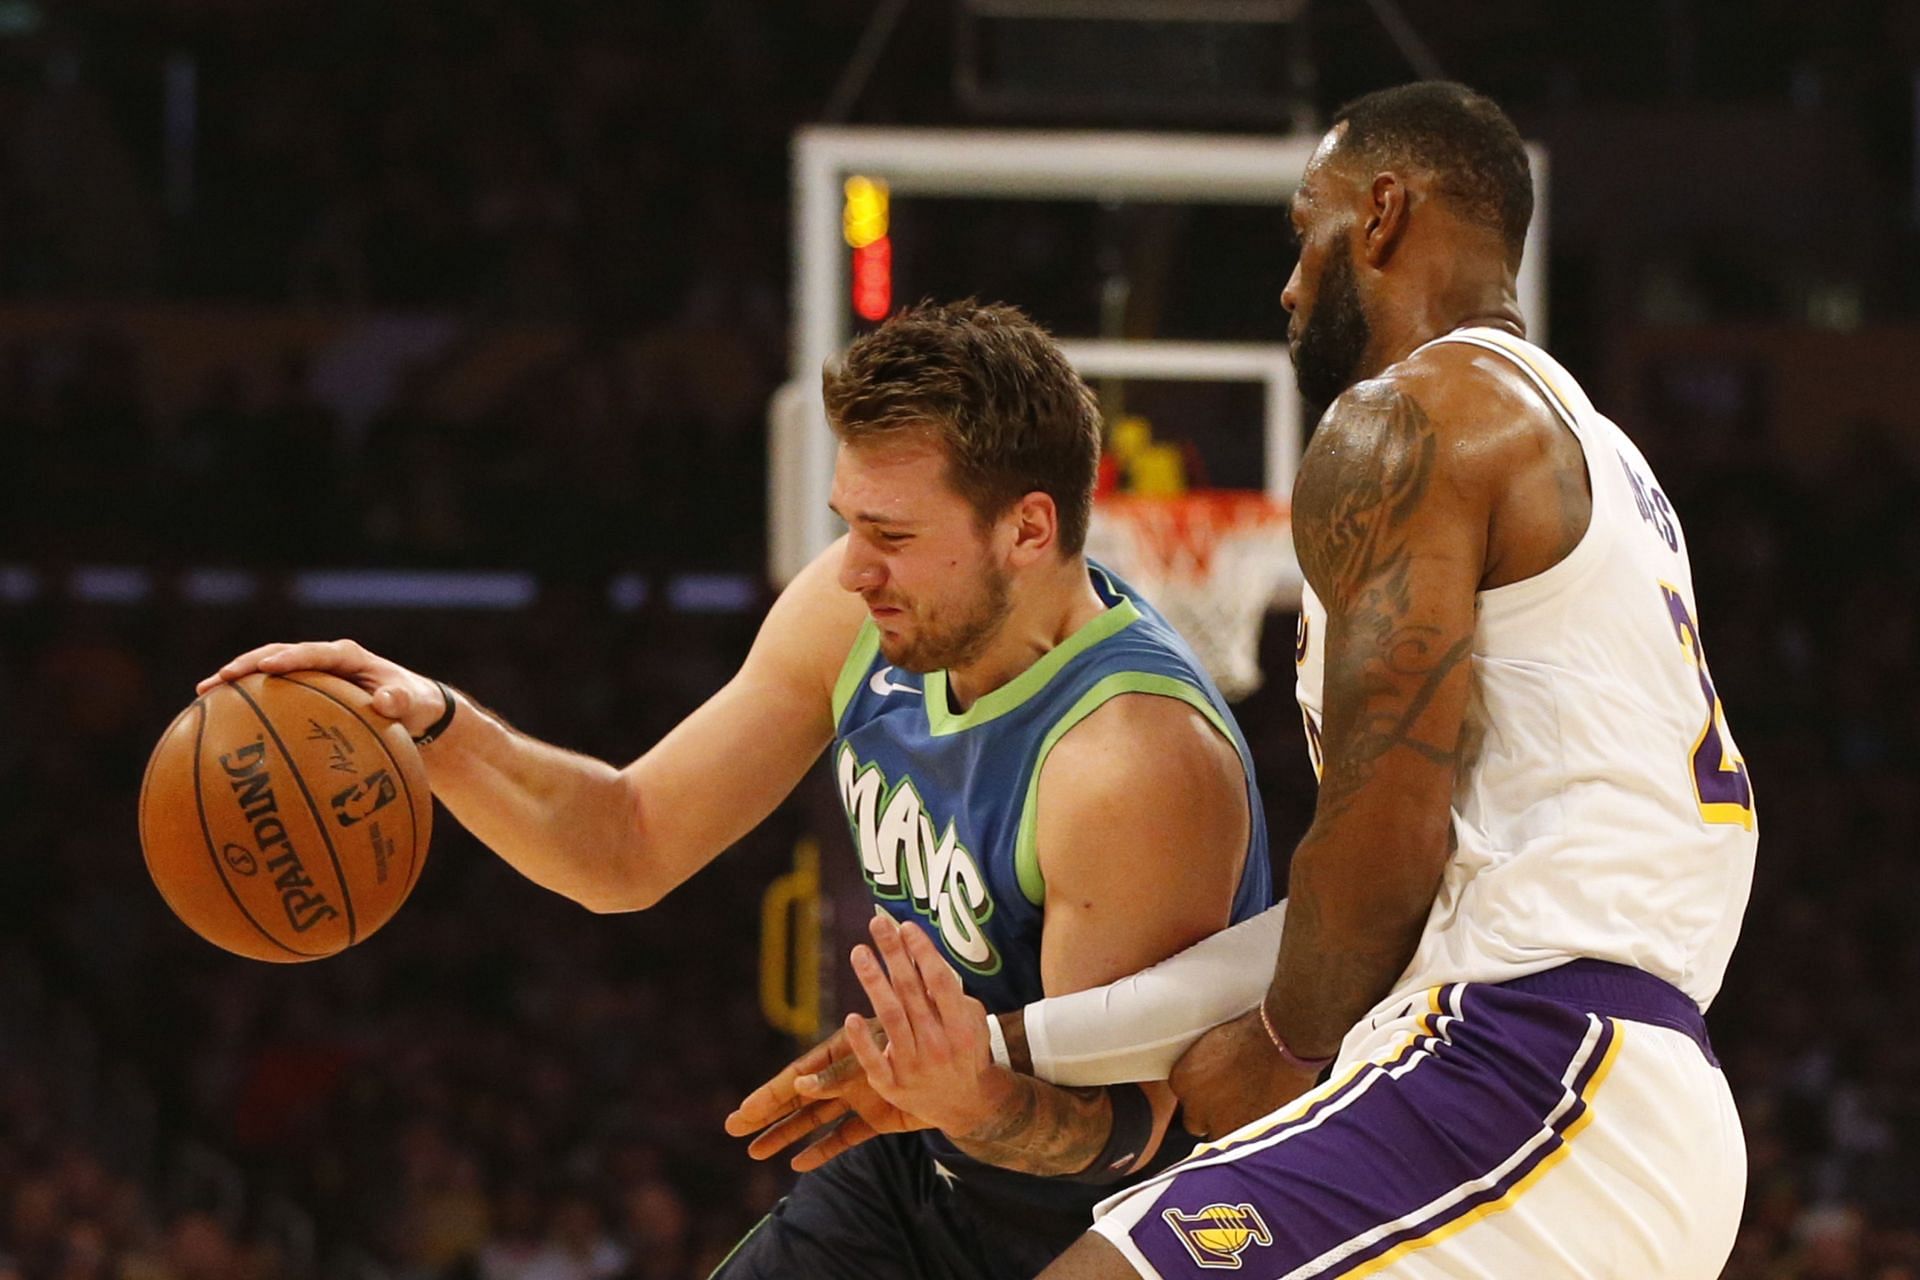 Luka Doncic (left) and Lebron James in action during Dallas Mavericks vs LA Lakers game.